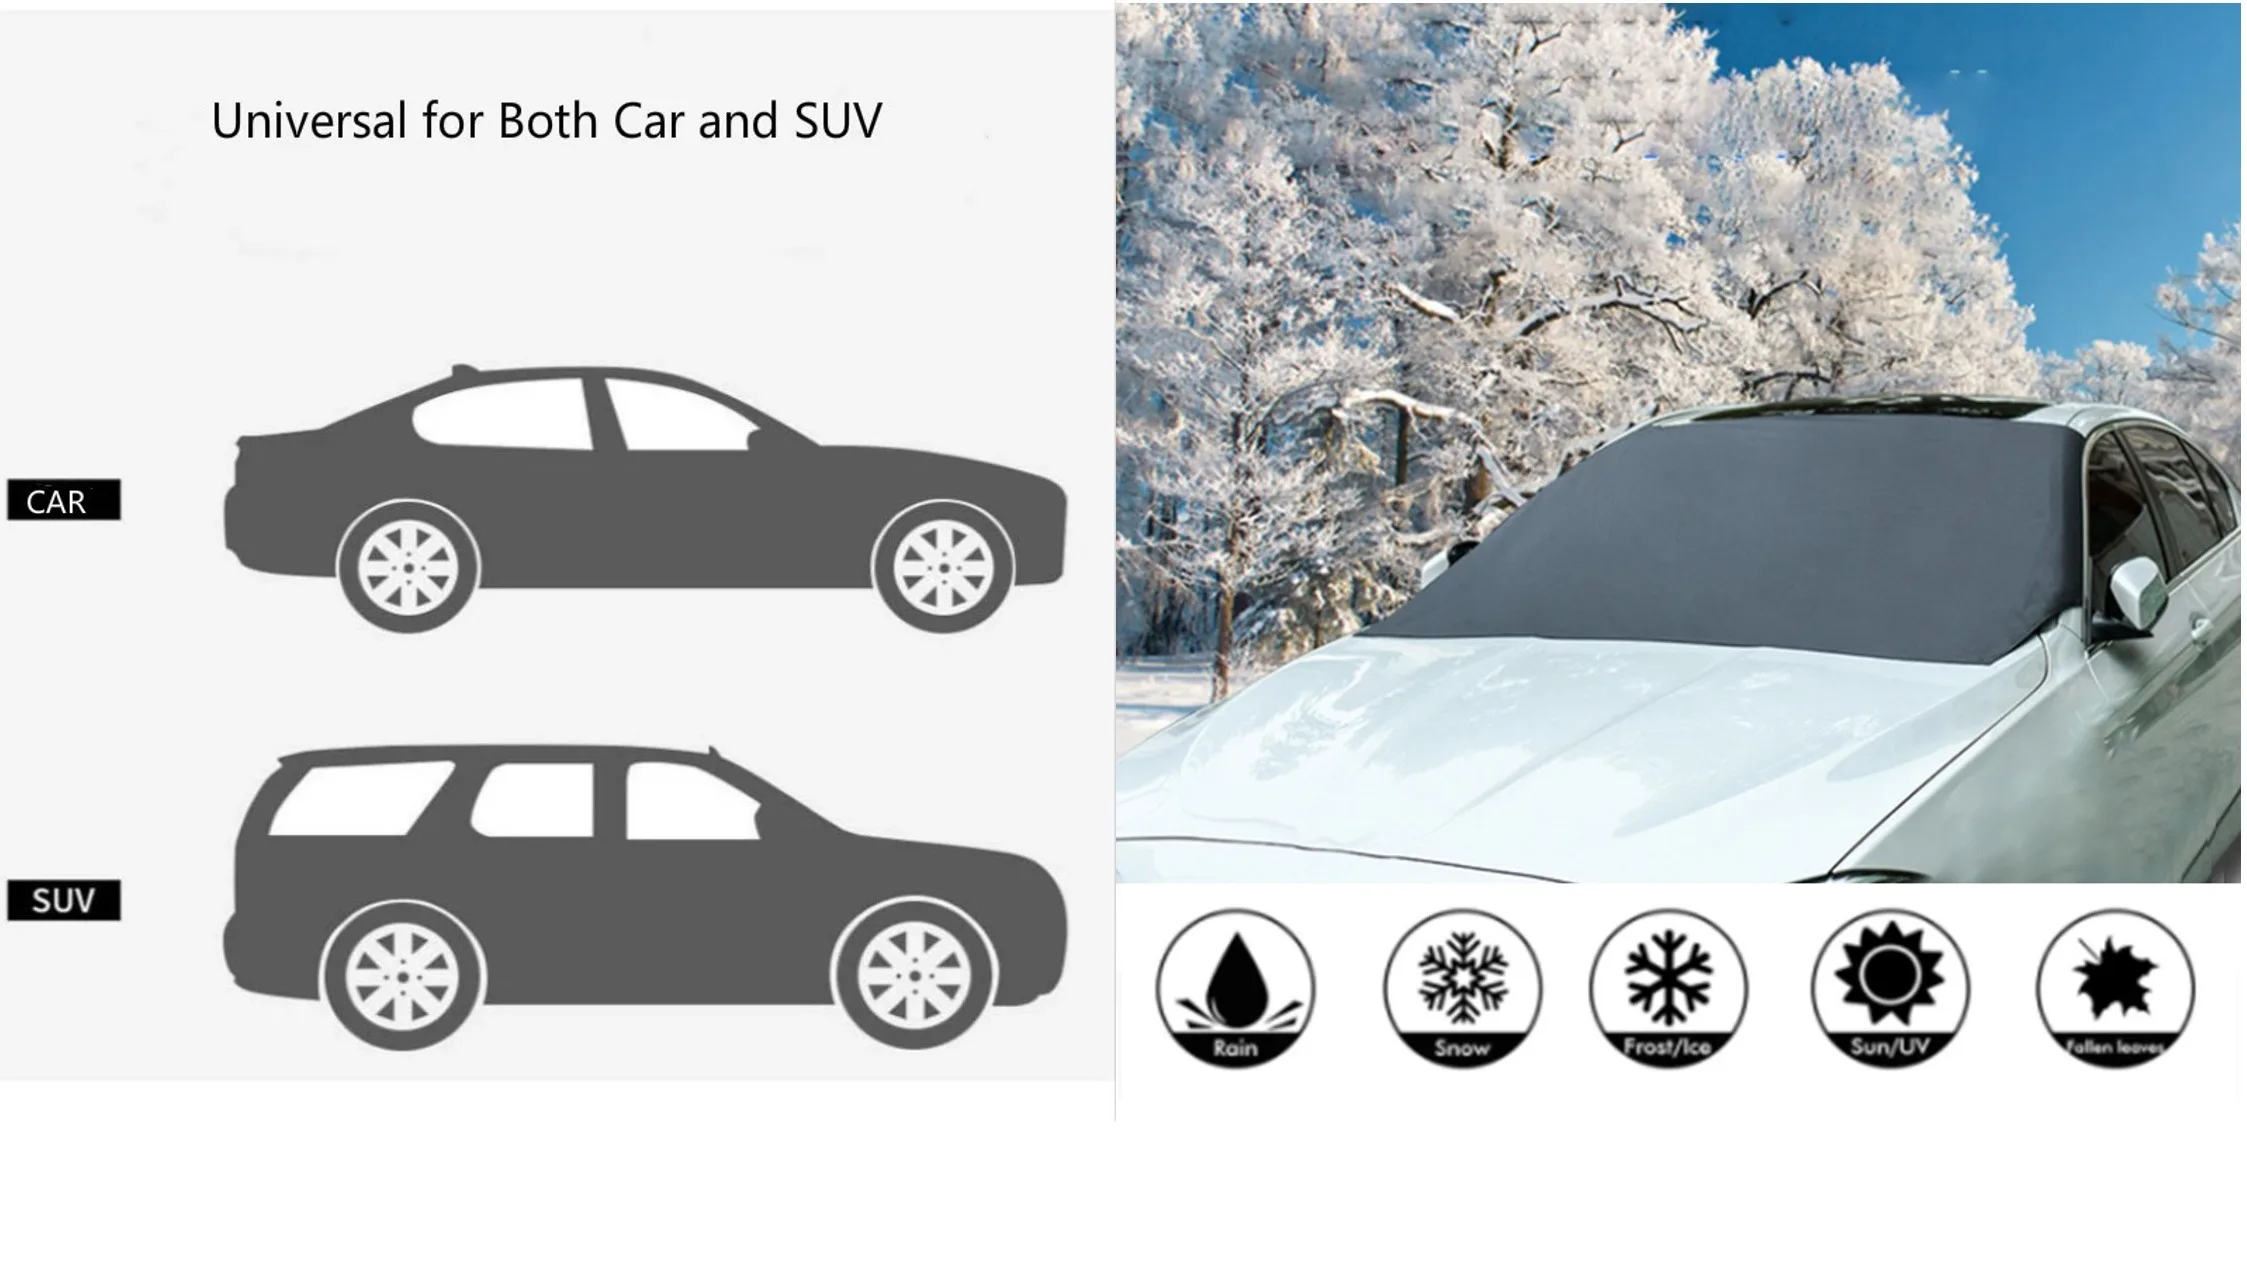 210cm*125cm Magnetic Car Windshield UV Sunshade Snow Cover Frost Guard  Protector 